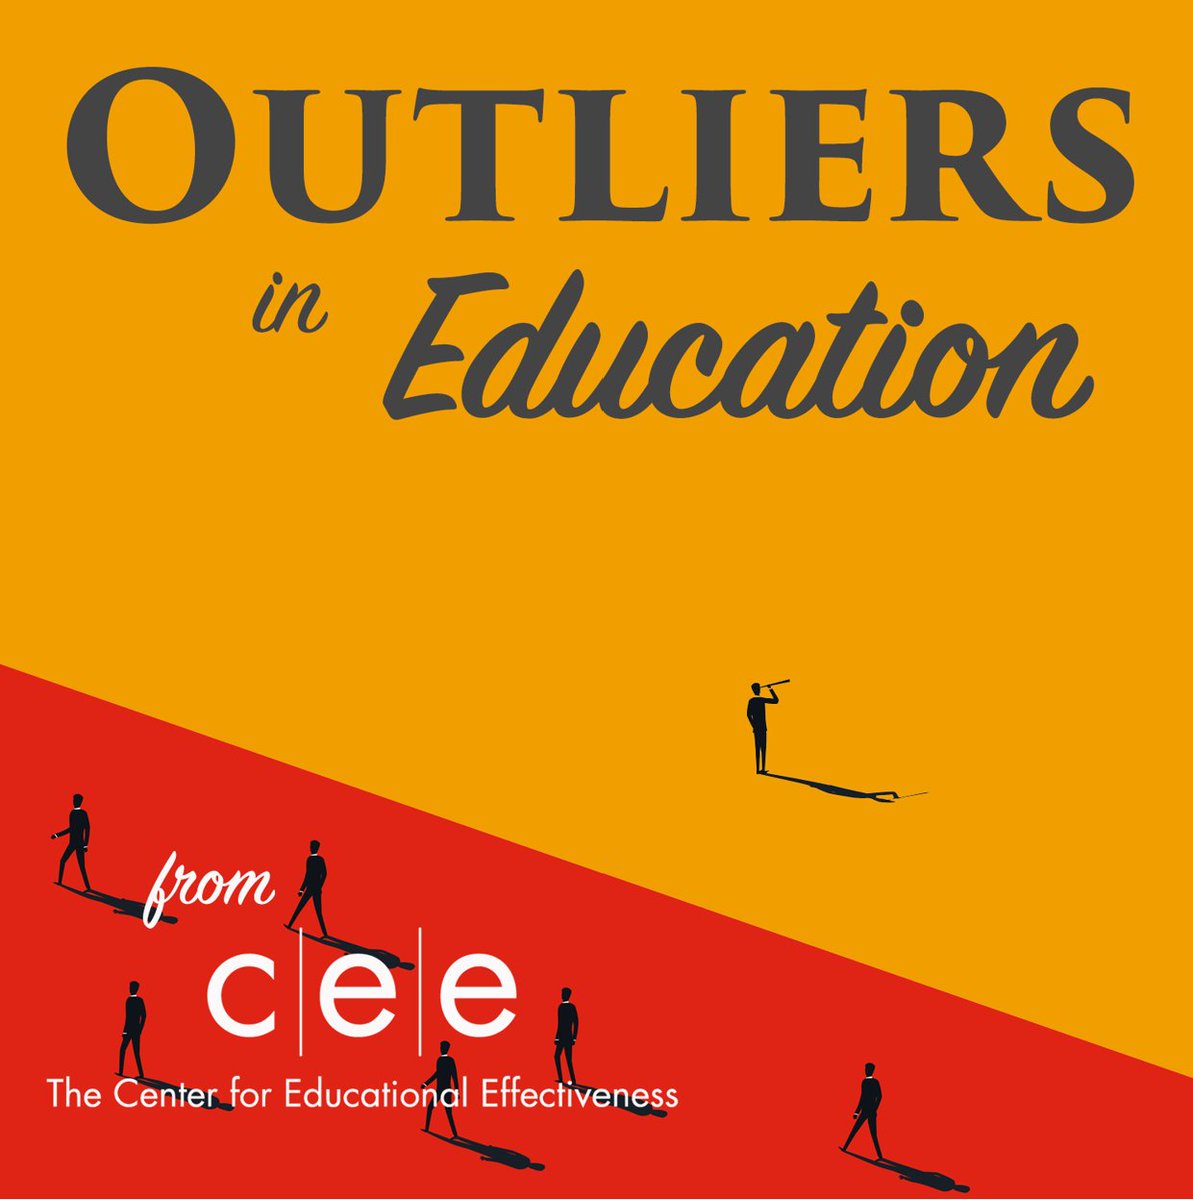 Opportunity to learn from @erahm_chris and #ericsobotta as they share about implementing student voice in our upcoming #outliersineducation #podcastepisode. Check out episode 19 at buzzsprout.com/1713625/114039…. Stay tuned for the new podcast drop! @CEEffectiveness  @CoachJimJohnson